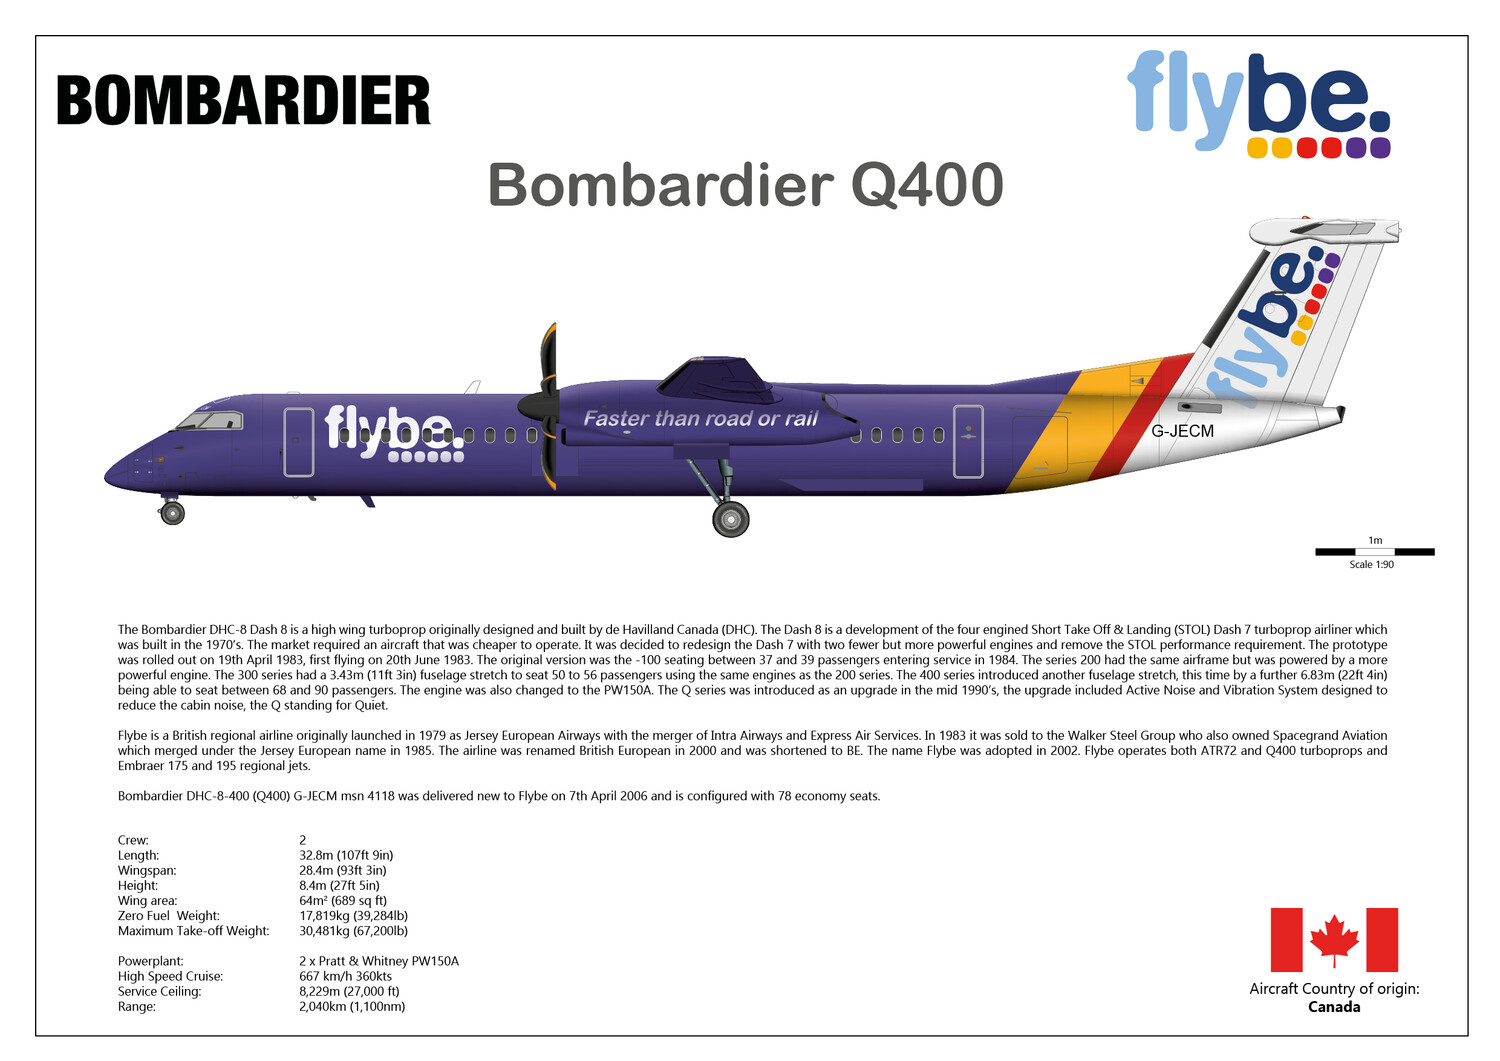 Bombardier Q400 of Flybe